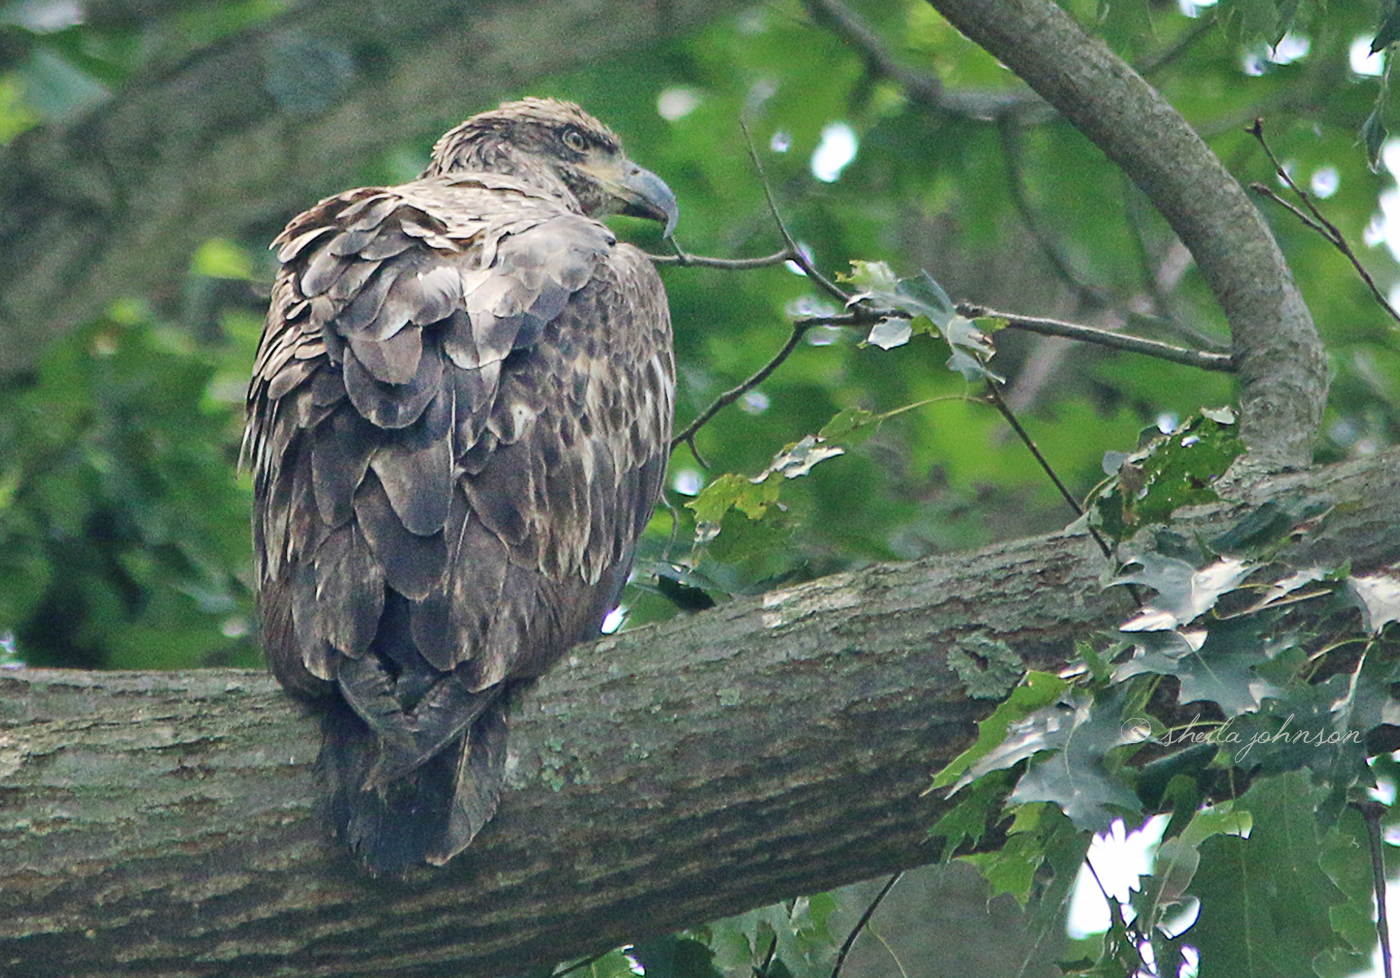 This &#039;Little&#039; Juvenile Bald Eagle Was Caught Watching The Adult Bald Eagles At The Conowingo Damn At The Susquehanna River In Maryland.